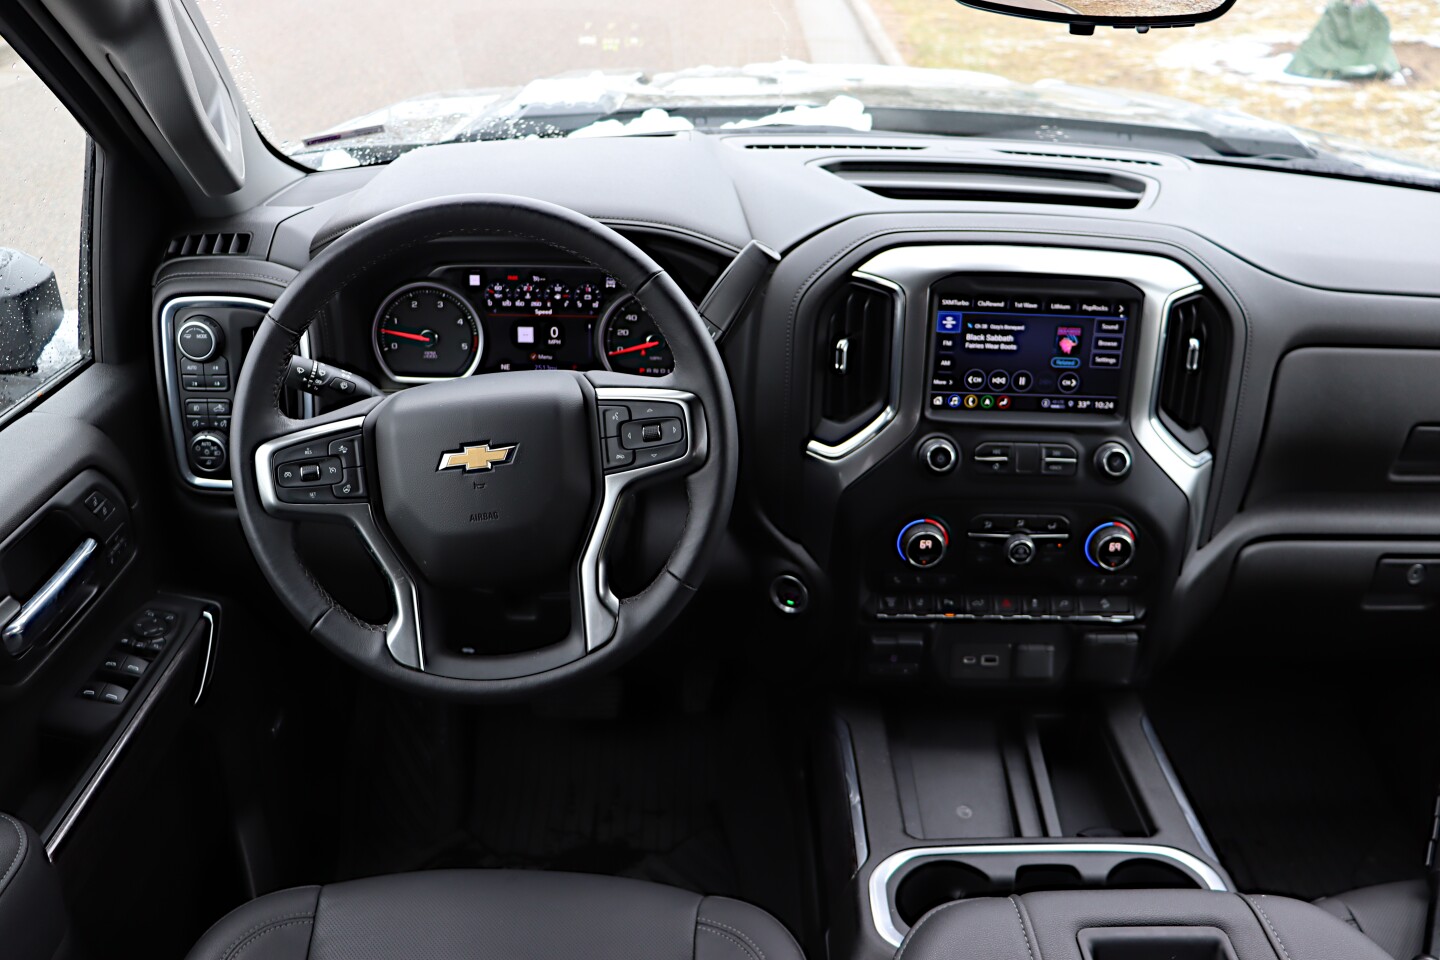 Controls in the 2022 Chevrolet Silverado 2500 HD are easy to understand, but the infotainment is a bit outdated